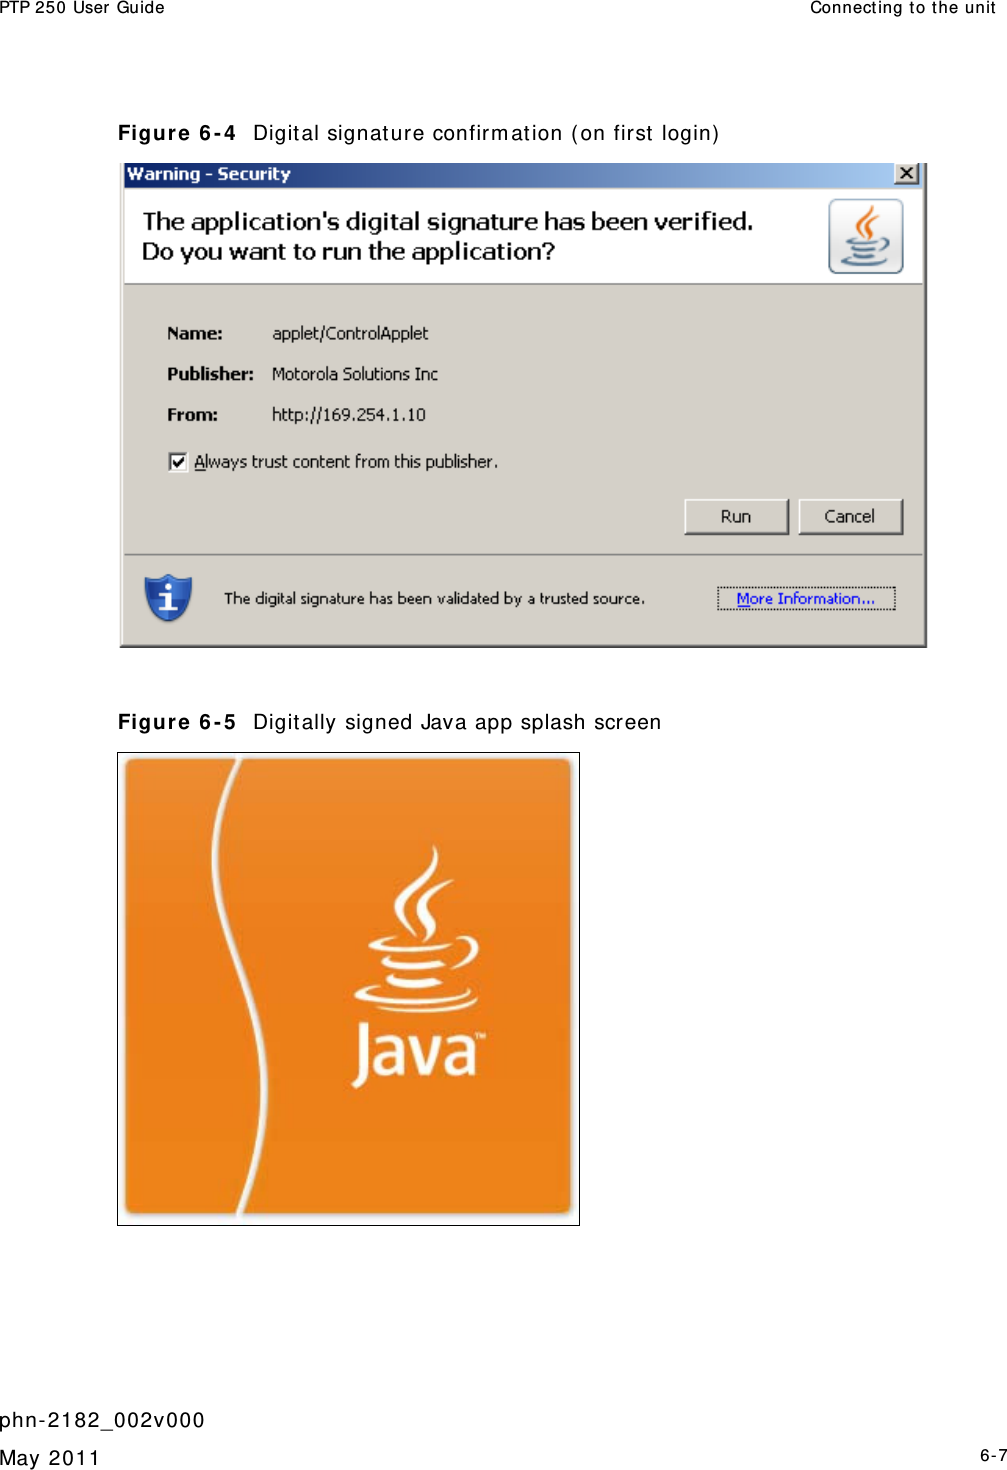 PTP 250 User Guide  Connect ing to t he unit   phn- 2182_002v000   May 2011   6-7  Figure 6 - 4   Digital signature confirm ation ( on first  login)    Figure 6 - 5   Digit ally signed Java app splash screen  